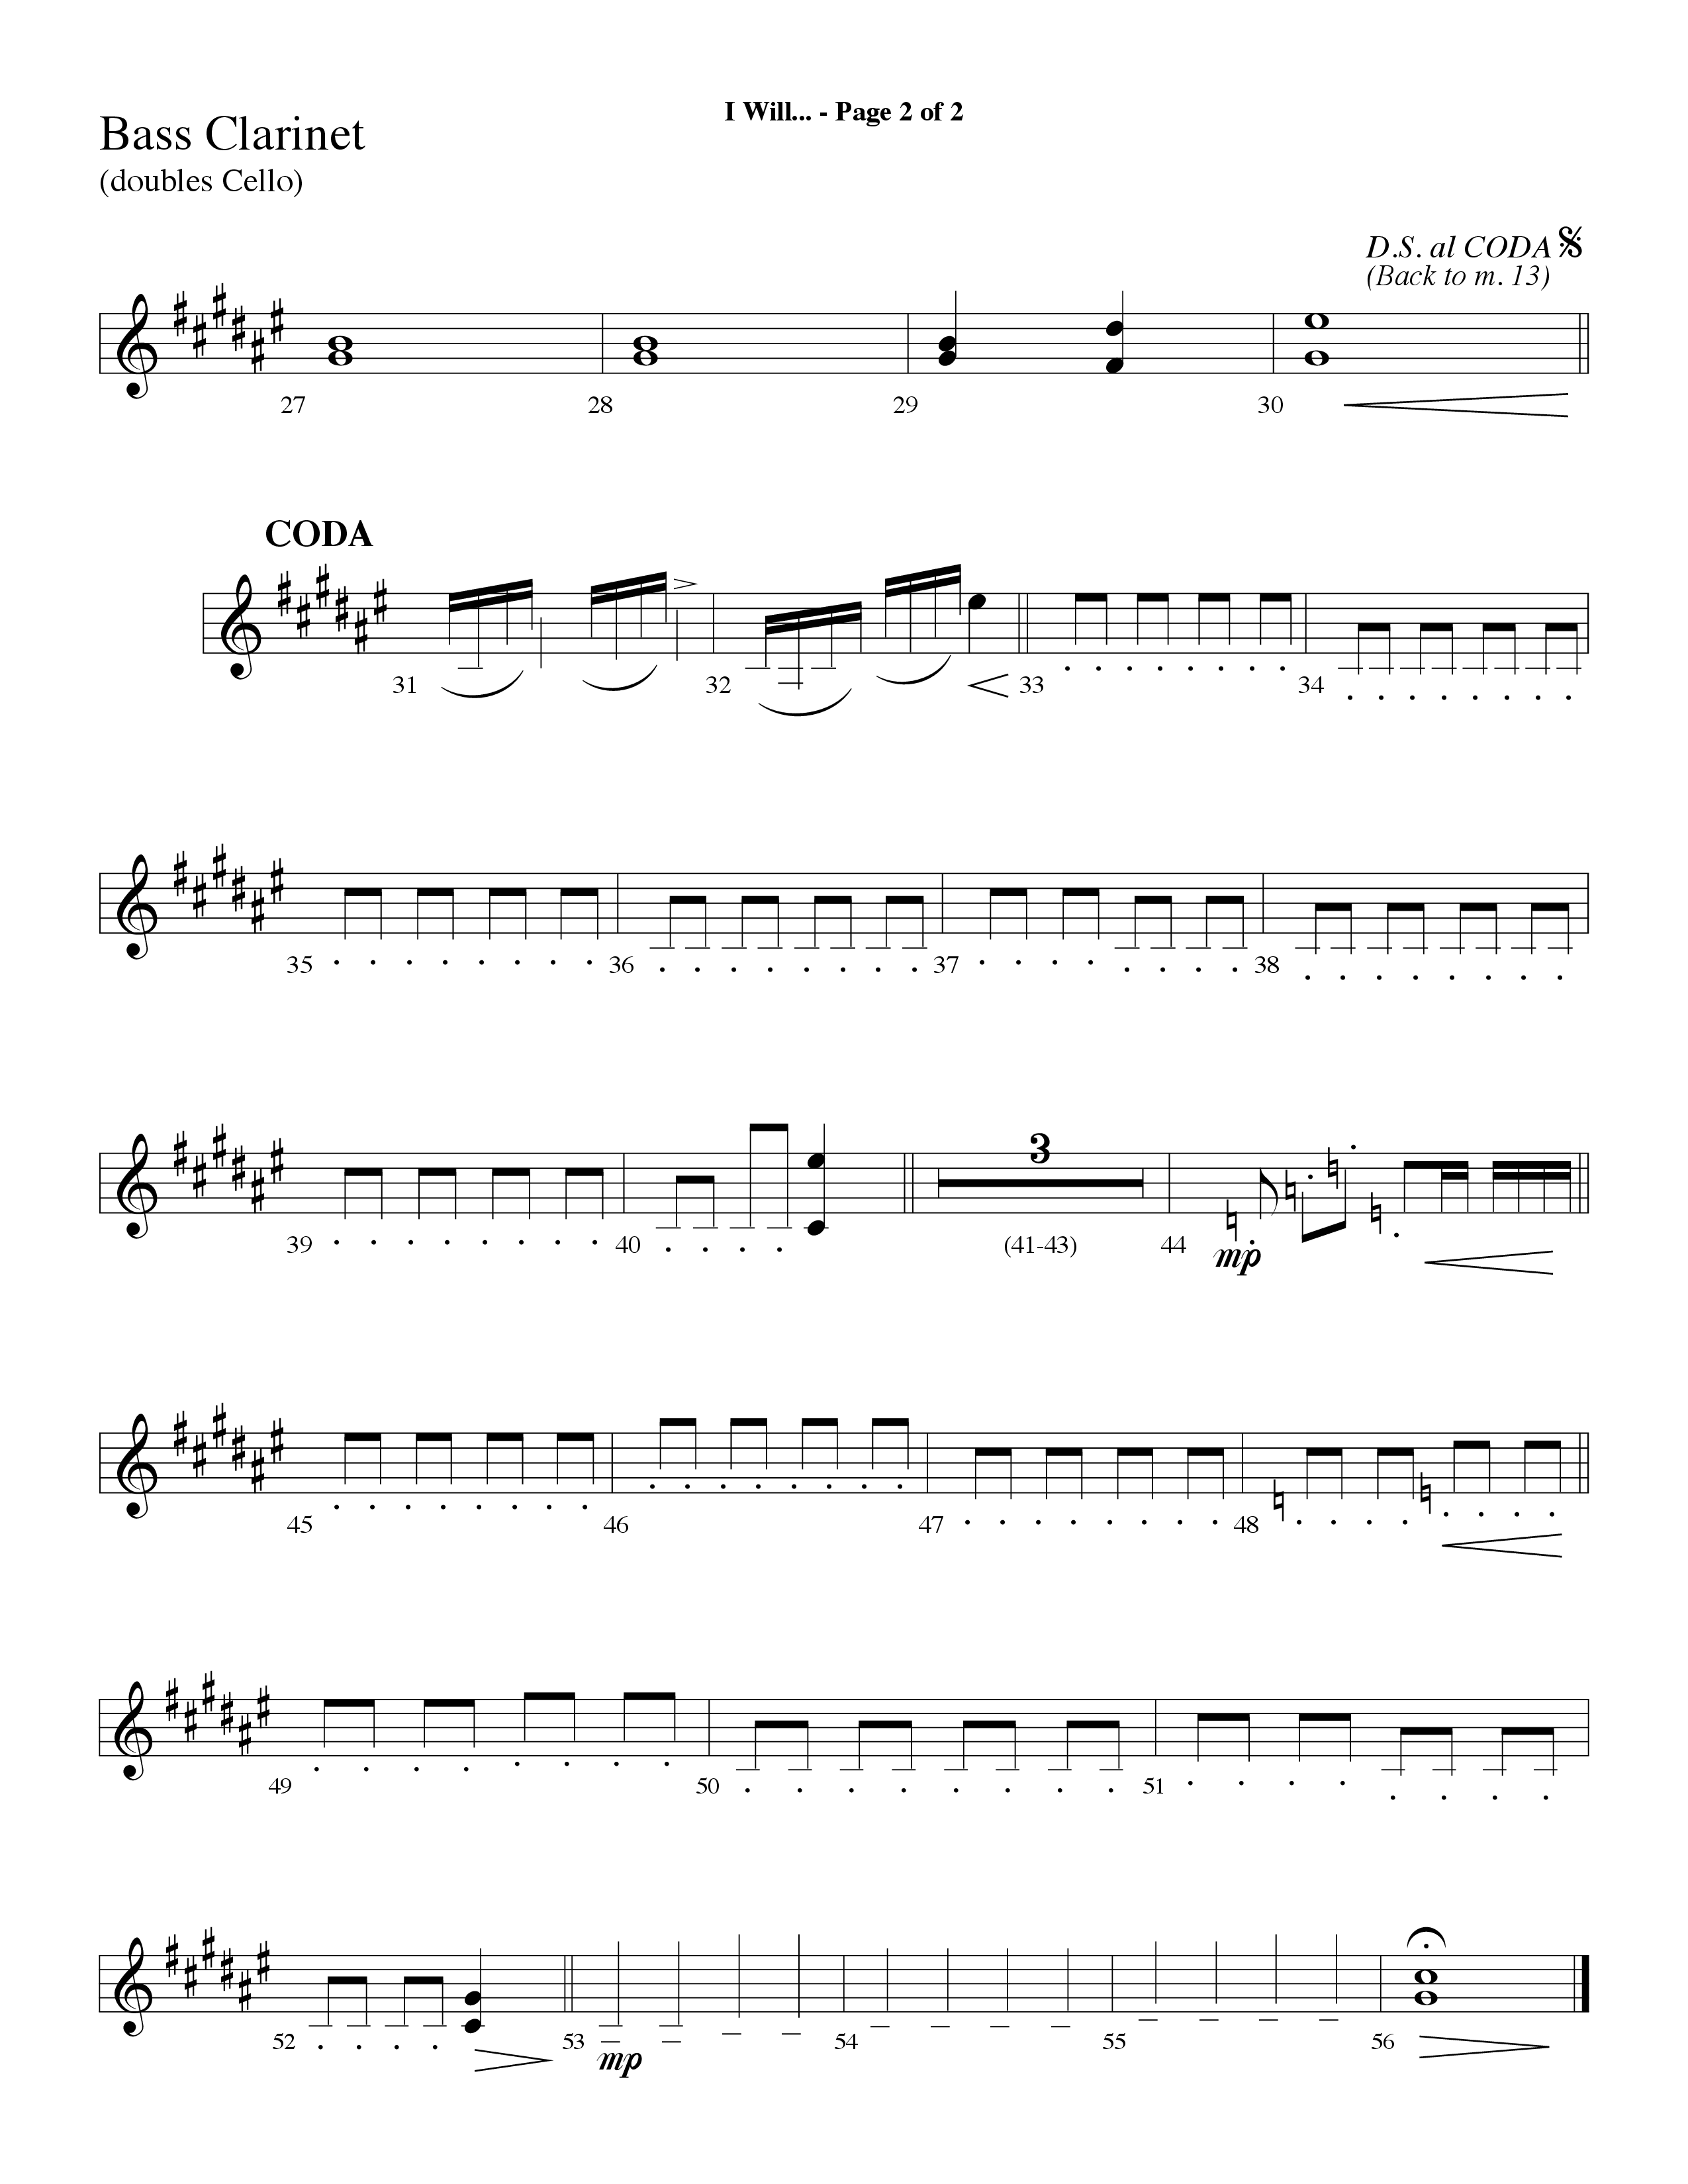 I Will (with Take The Name Of Jesus With You) (Choral Anthem SATB) Bass Clarinet (Lifeway Choral / Arr. Alyssa Goins / Orch. Ric Domenico)